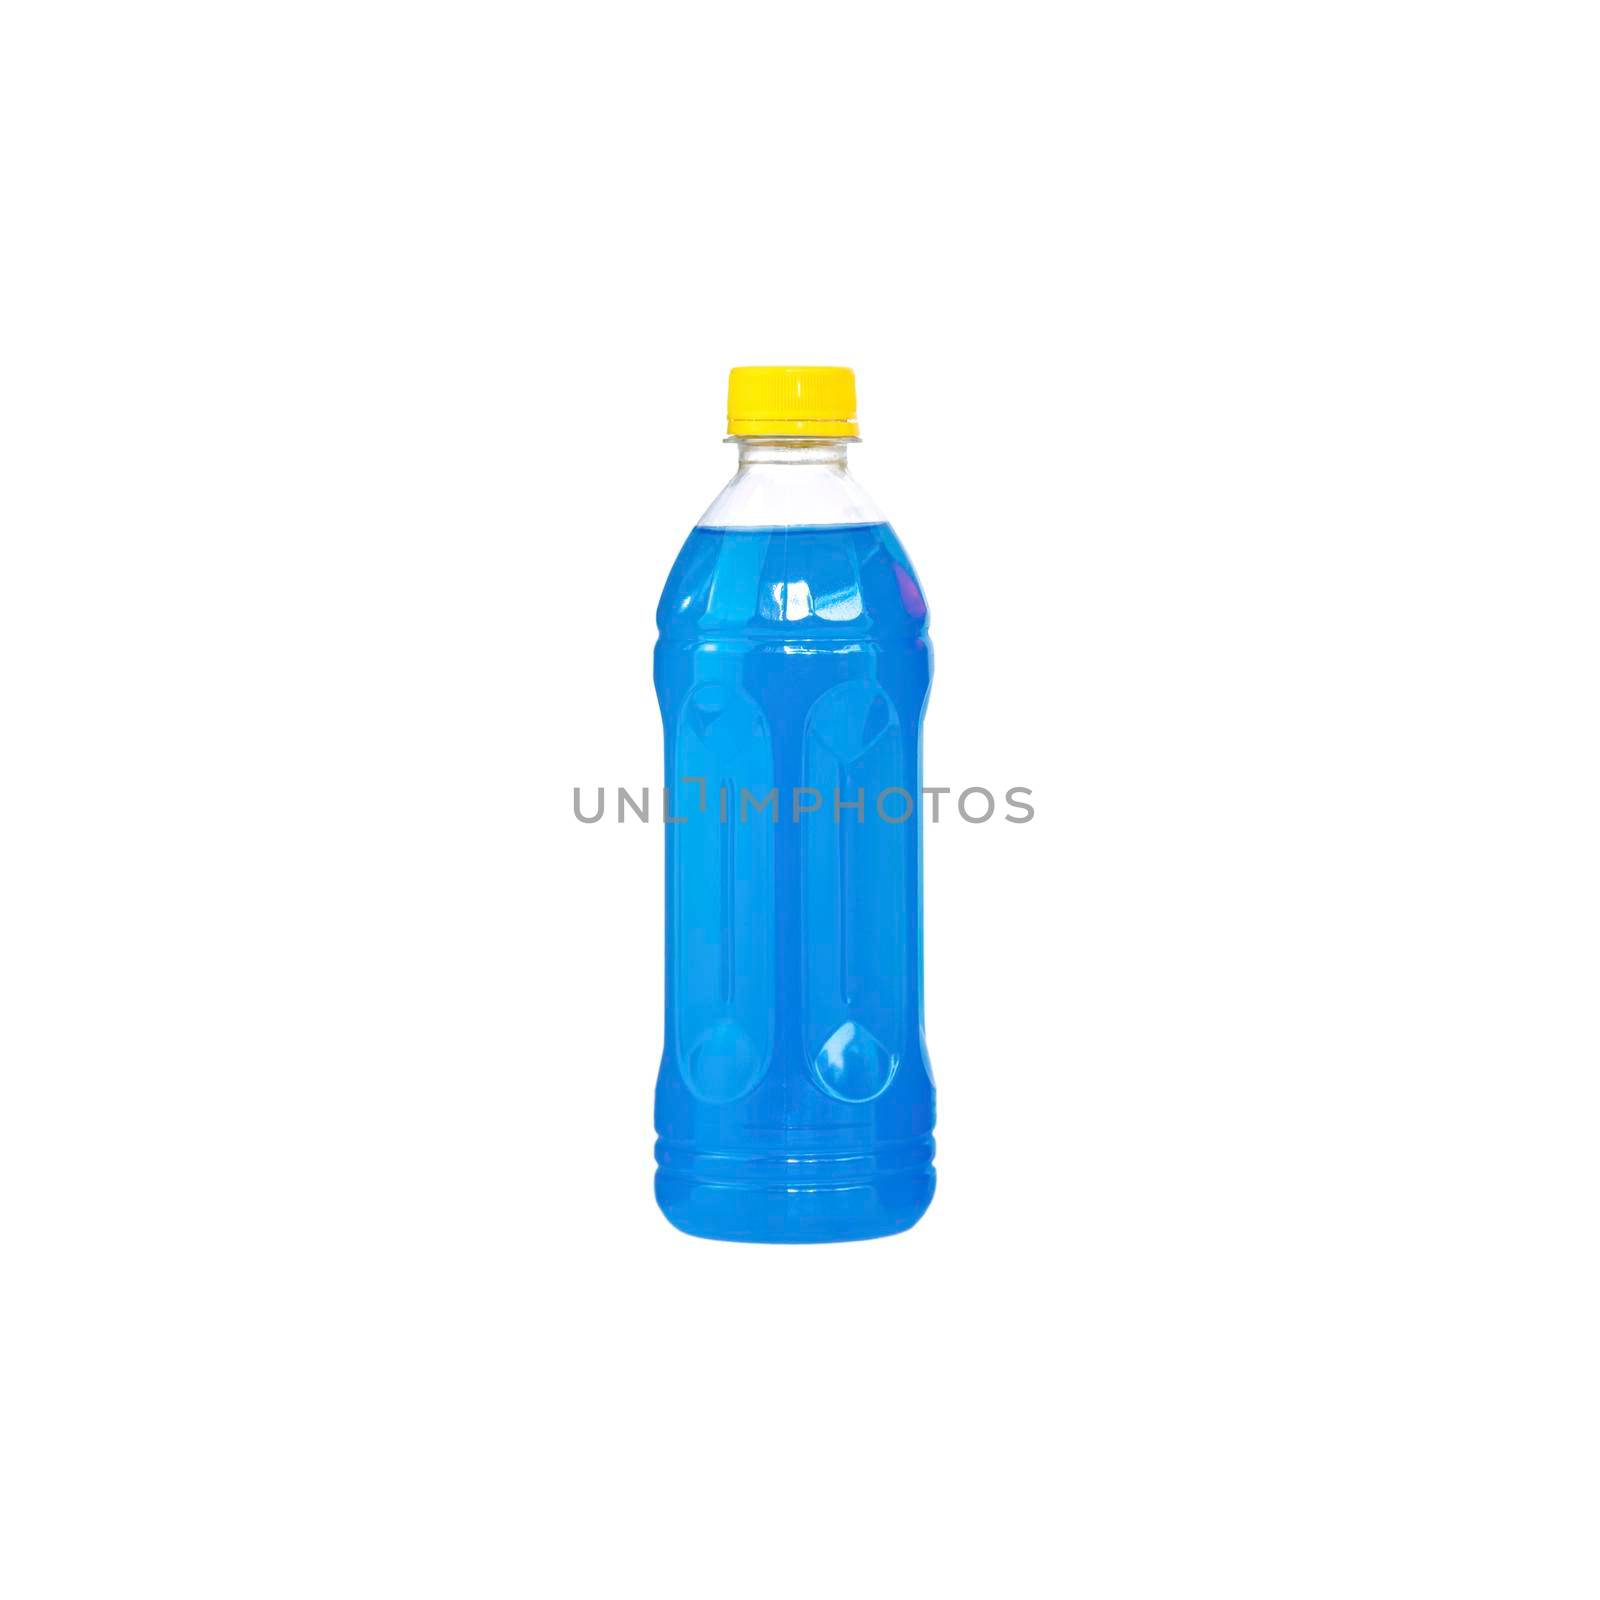 Blue sparkling water in a plastic bottle isolated on white background